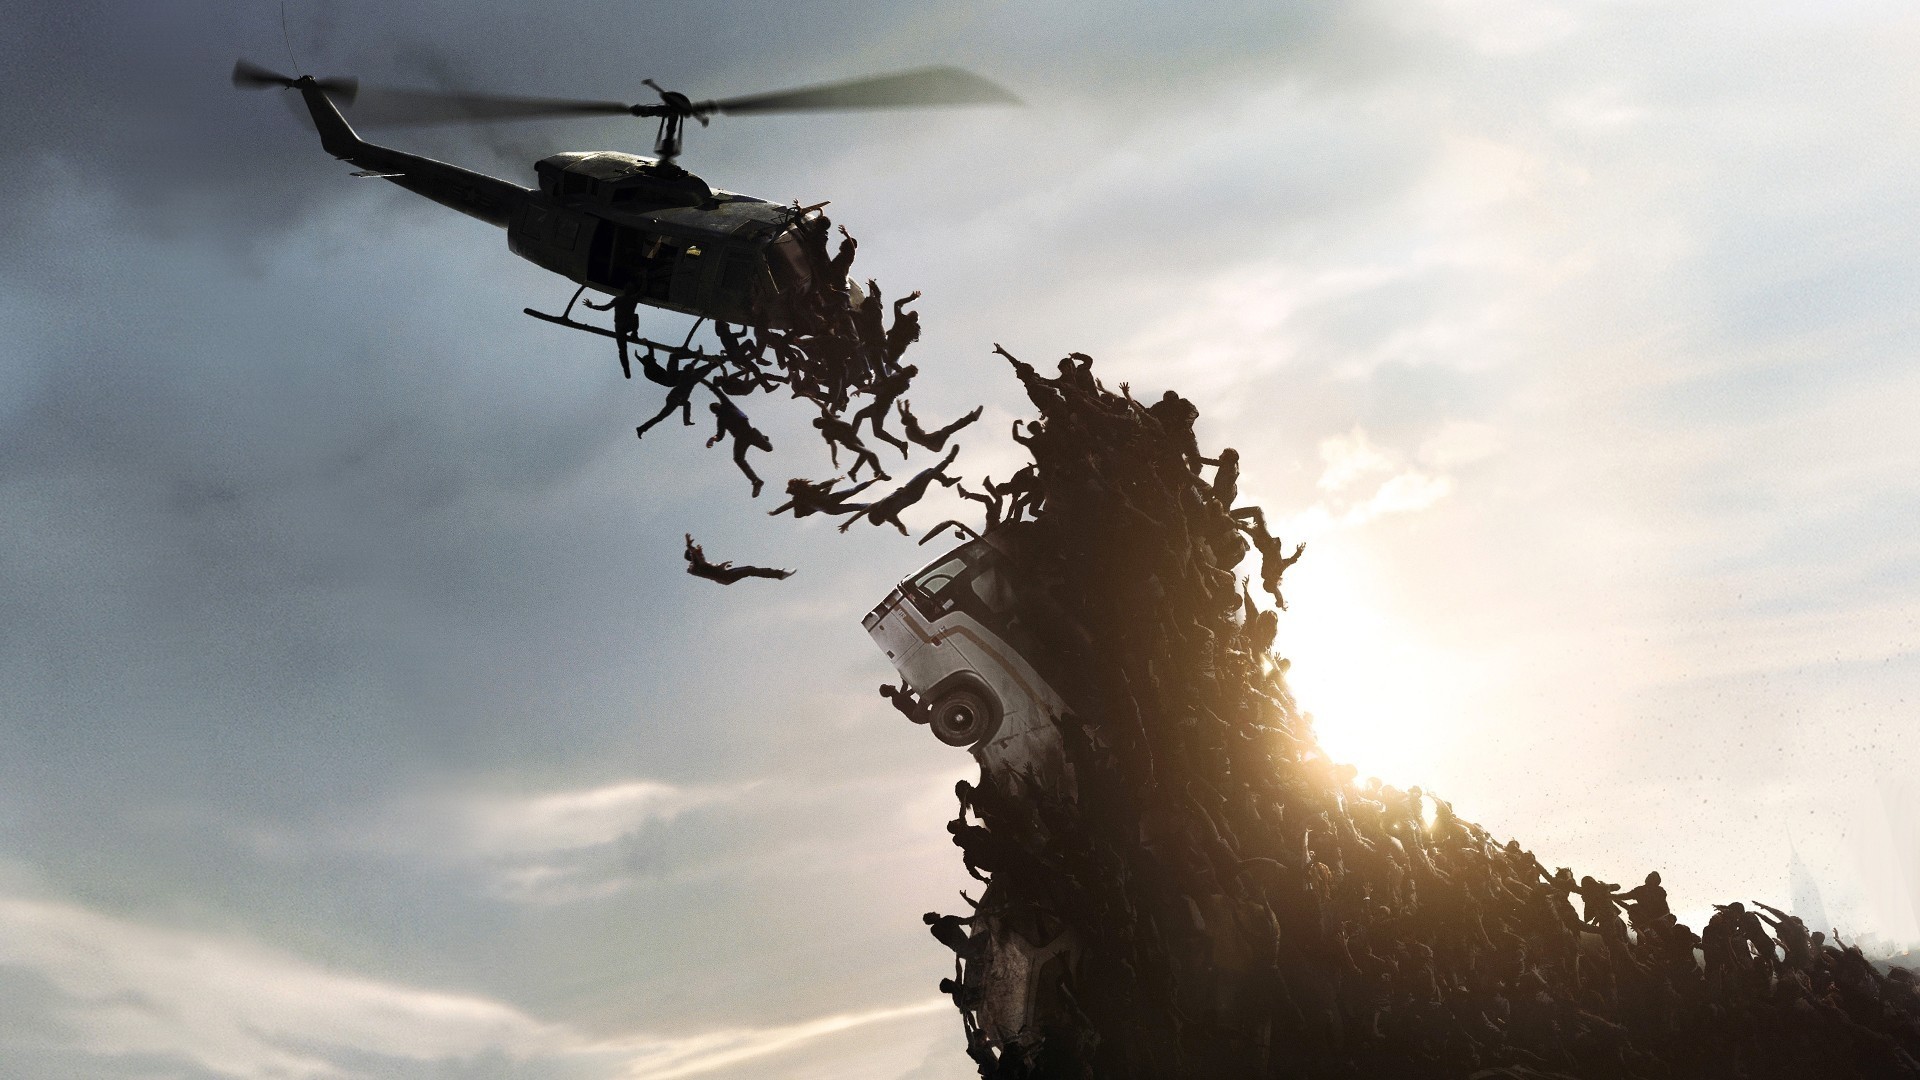 General 1920x1080 World War Z zombies helicopters movies 2013 (Year) vehicle undead